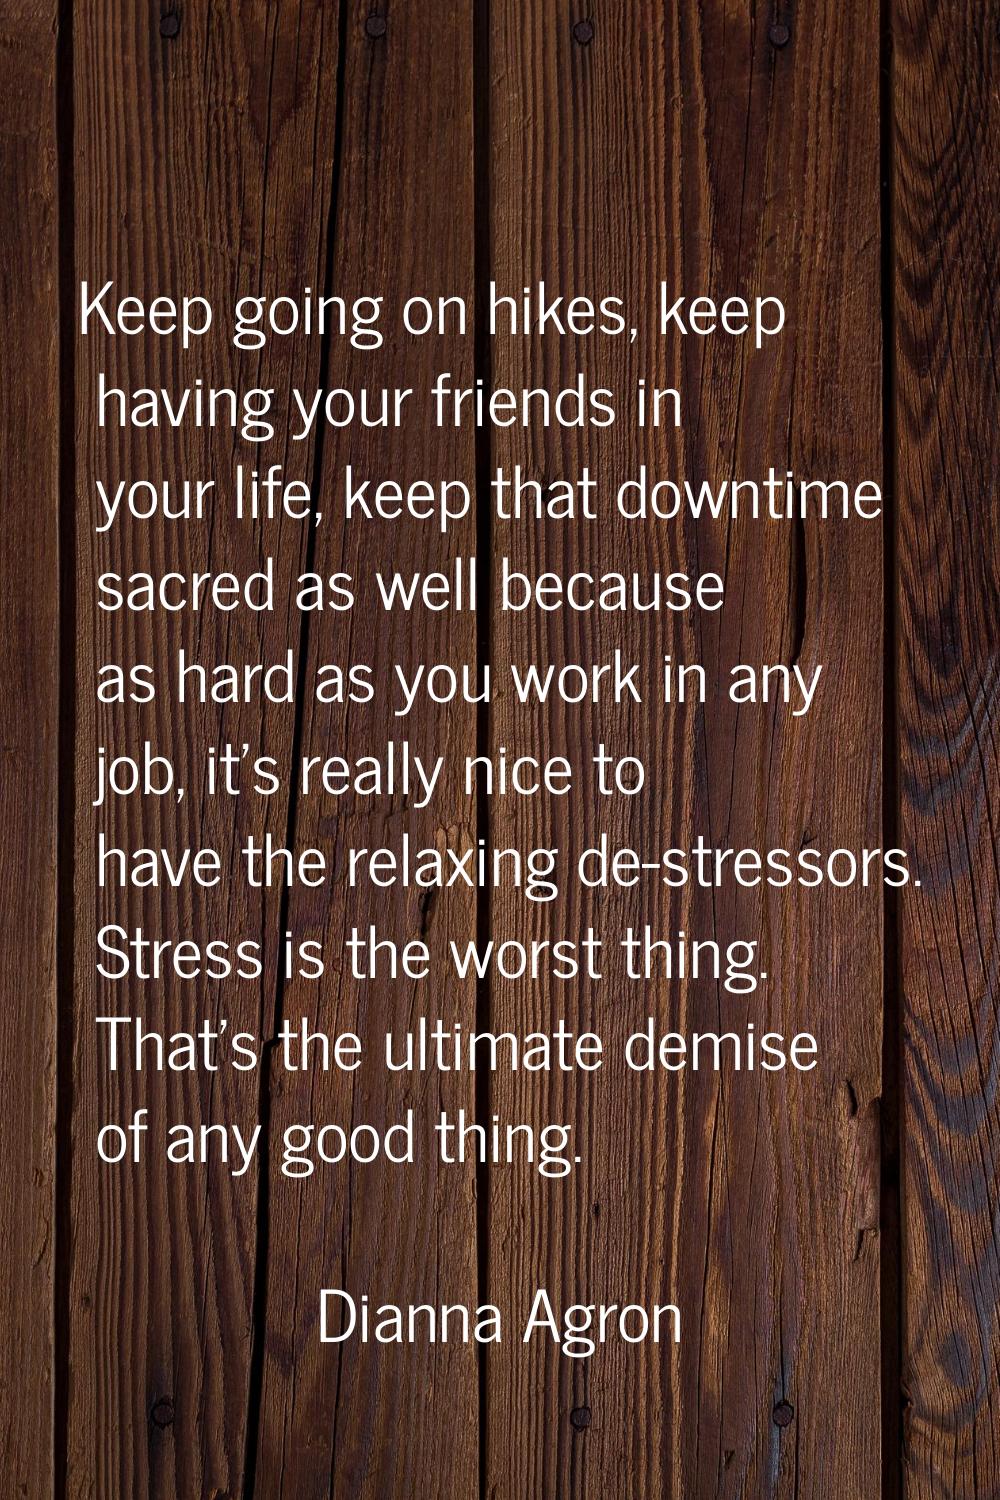 Keep going on hikes, keep having your friends in your life, keep that downtime sacred as well becau